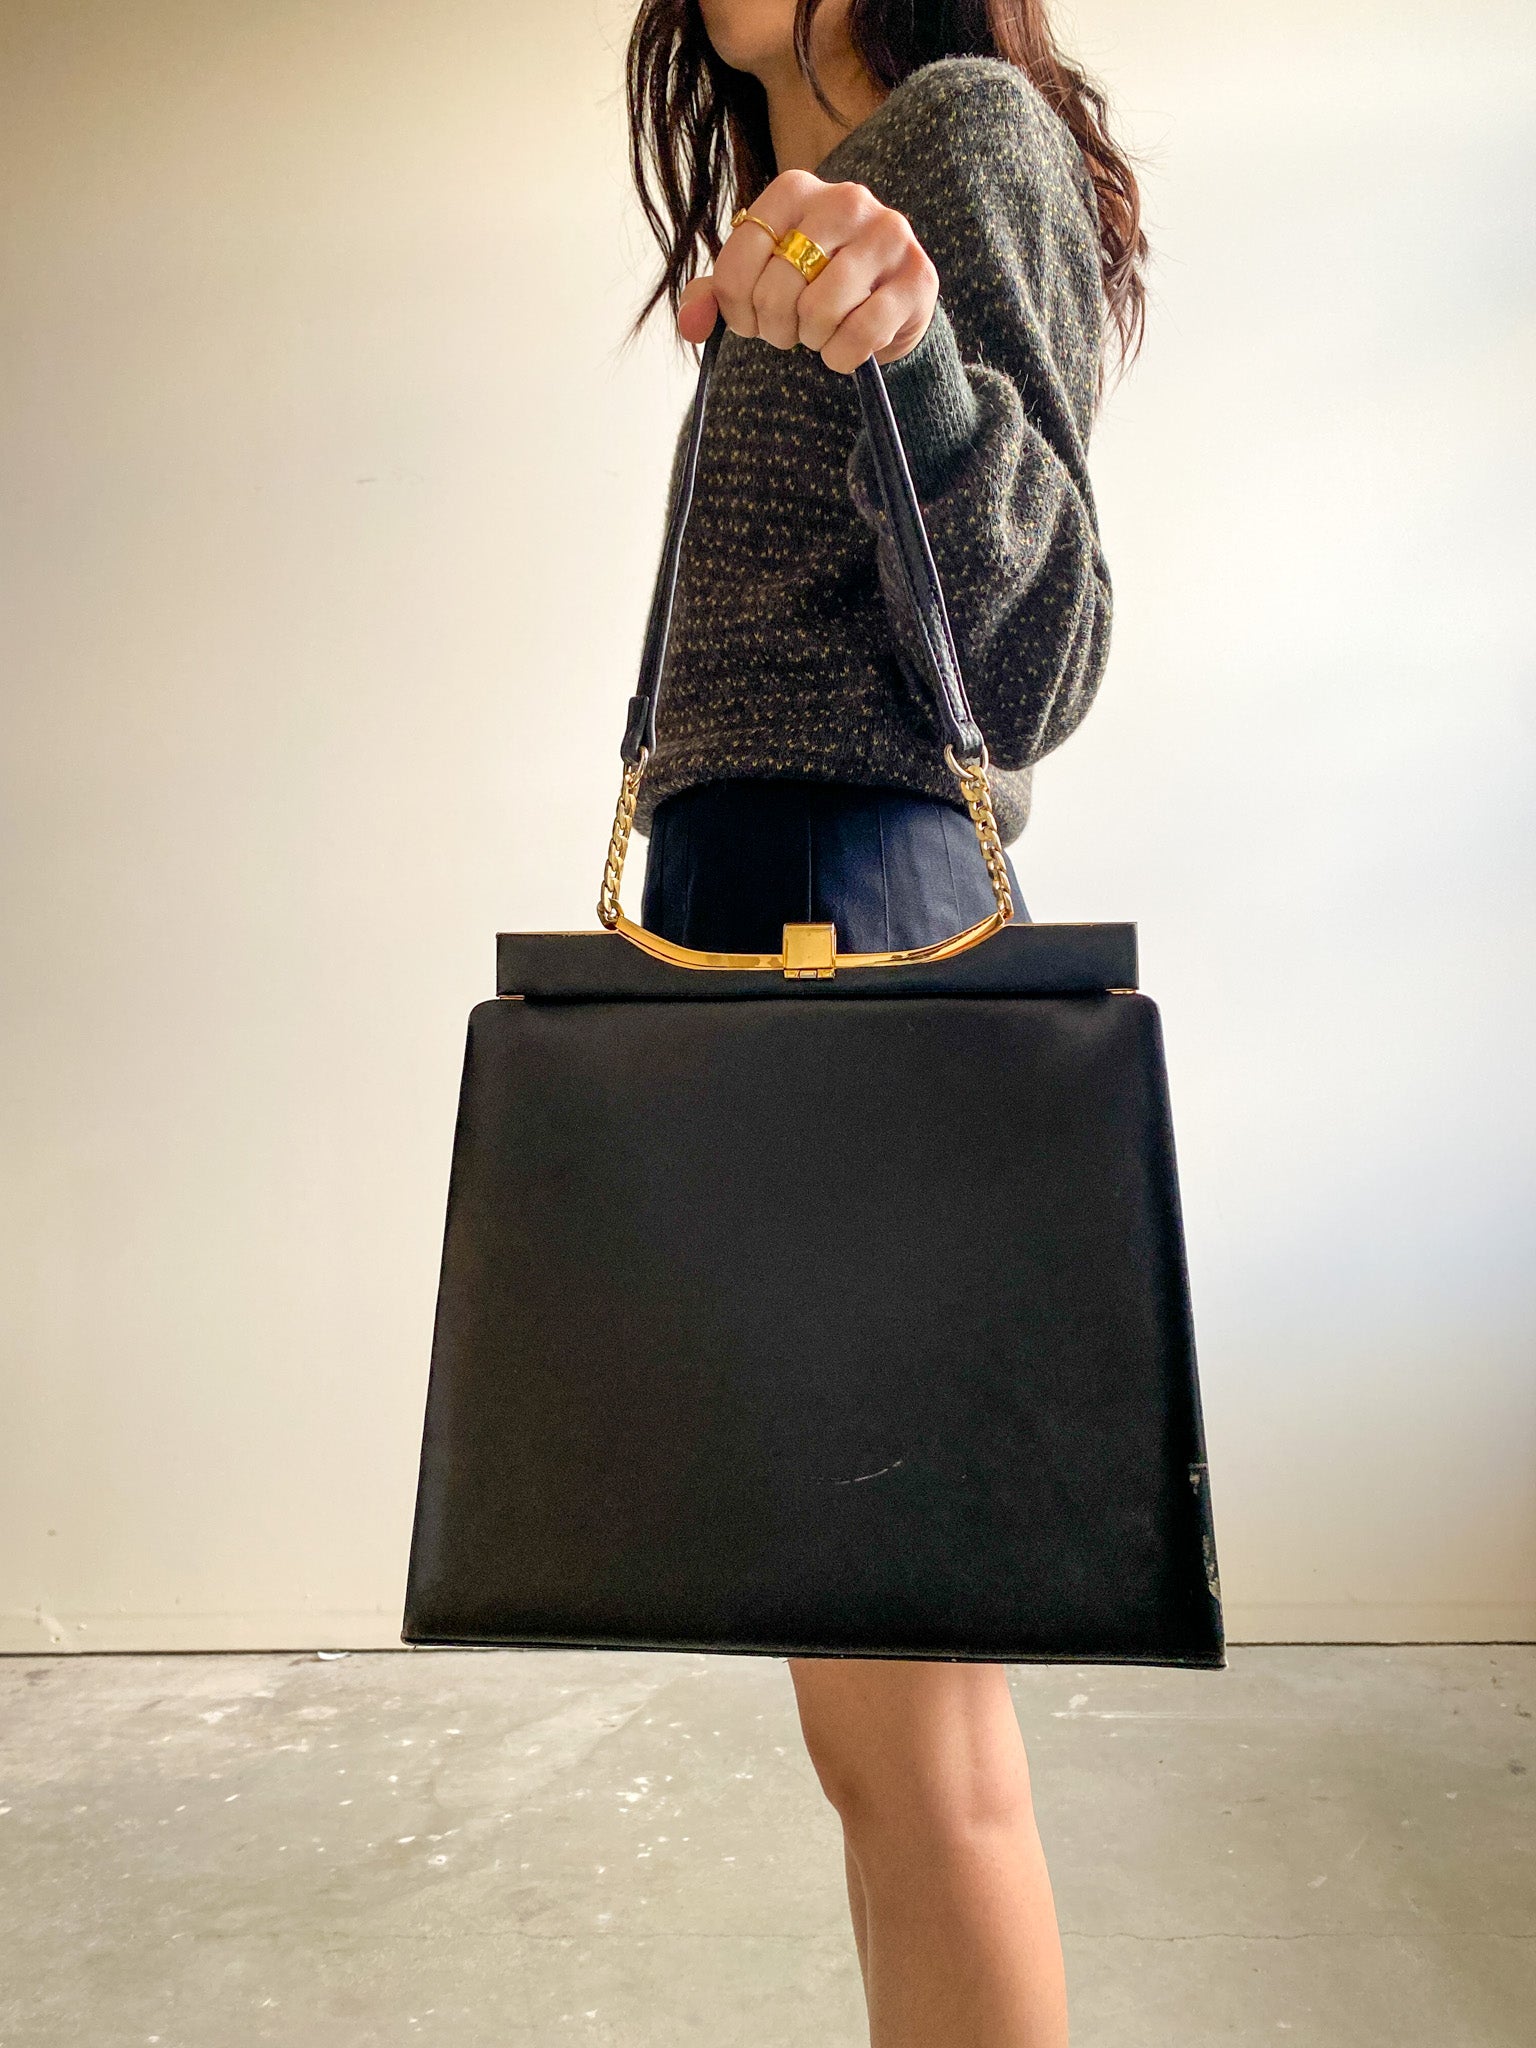 Vintage Black Leather Structured Purse with Gold Hardware